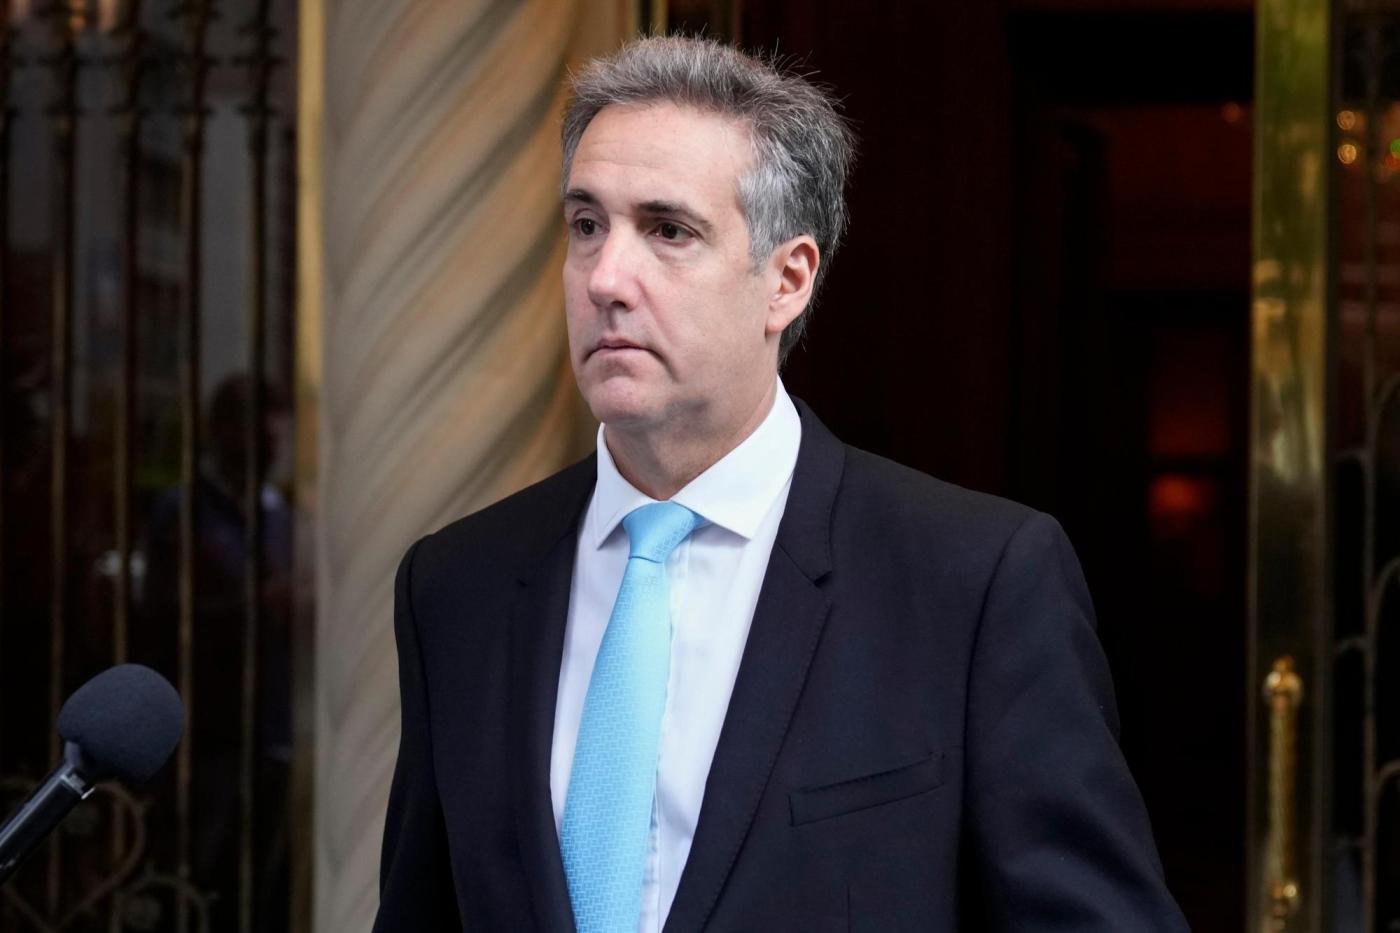 michael-cohen-pressed-on-his-crimes-and-lies-as-defense-attacks-key-trump-hush-money-trial-witness